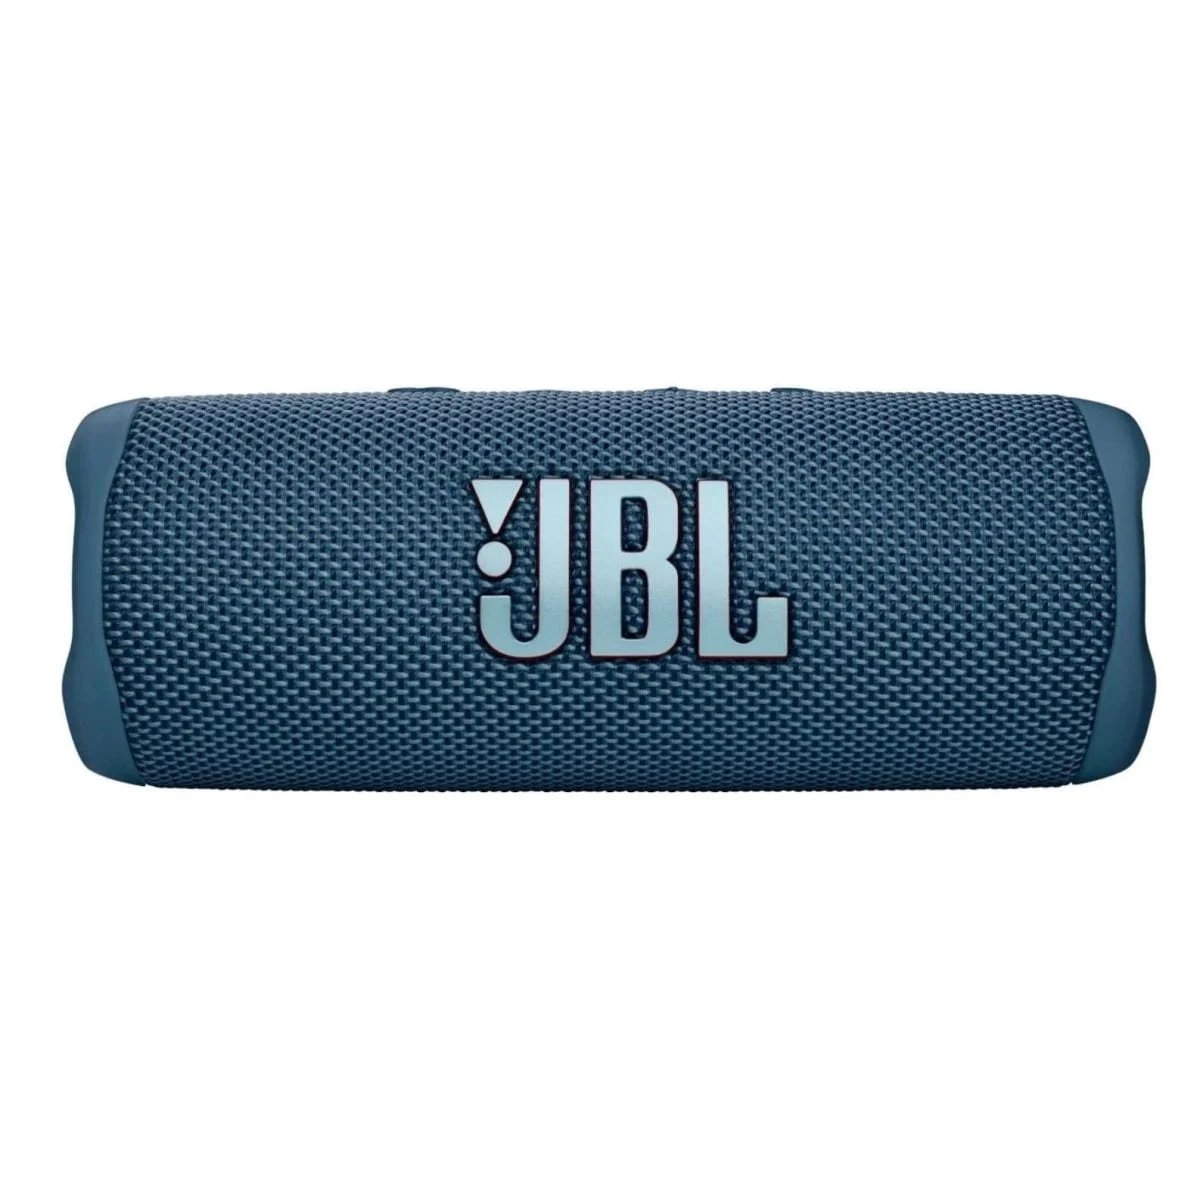 71B1Vf9Sifl. Ac Sl1500 Jbl &Lt;H1&Gt;Jbl Flip 6 Portable Bluetooth Wireless Speaker - Blue&Lt;/H1&Gt; Https://Www.youtube.com/Watch?V=F6Waogaxhme Bold Sound For Every Adventure. Your Adventure. Your Soundtrack. The Bold New Jbl Flip 6 Delivers Powerful Jbl Original Pro Sound With Exceptional Clarity Thanks To Its 2-Way Speaker System Consisting Of An Optimized Racetrack-Shaped Driver, Separate Tweeter, And Dual Pumping Bass Radiators. This Big-Sounding, Yet Easy To Carry Speaker Is Waterproof And Dustproof, So You Can Take It Anywhere In Any Weather. And With 12 Hours Of Battery Life, You Can Party ‘Til The Sun Goes Down—Or Comes Up—Wherever The Music Moves You. Use Partyboost To Link Multiple Compatible Speakers. The Flip 6 Comes In A Variety Of Cool Colors. Jbl Flip5 Jbl Flip 6 Portable Bluetooth Wireless Speaker - Blue